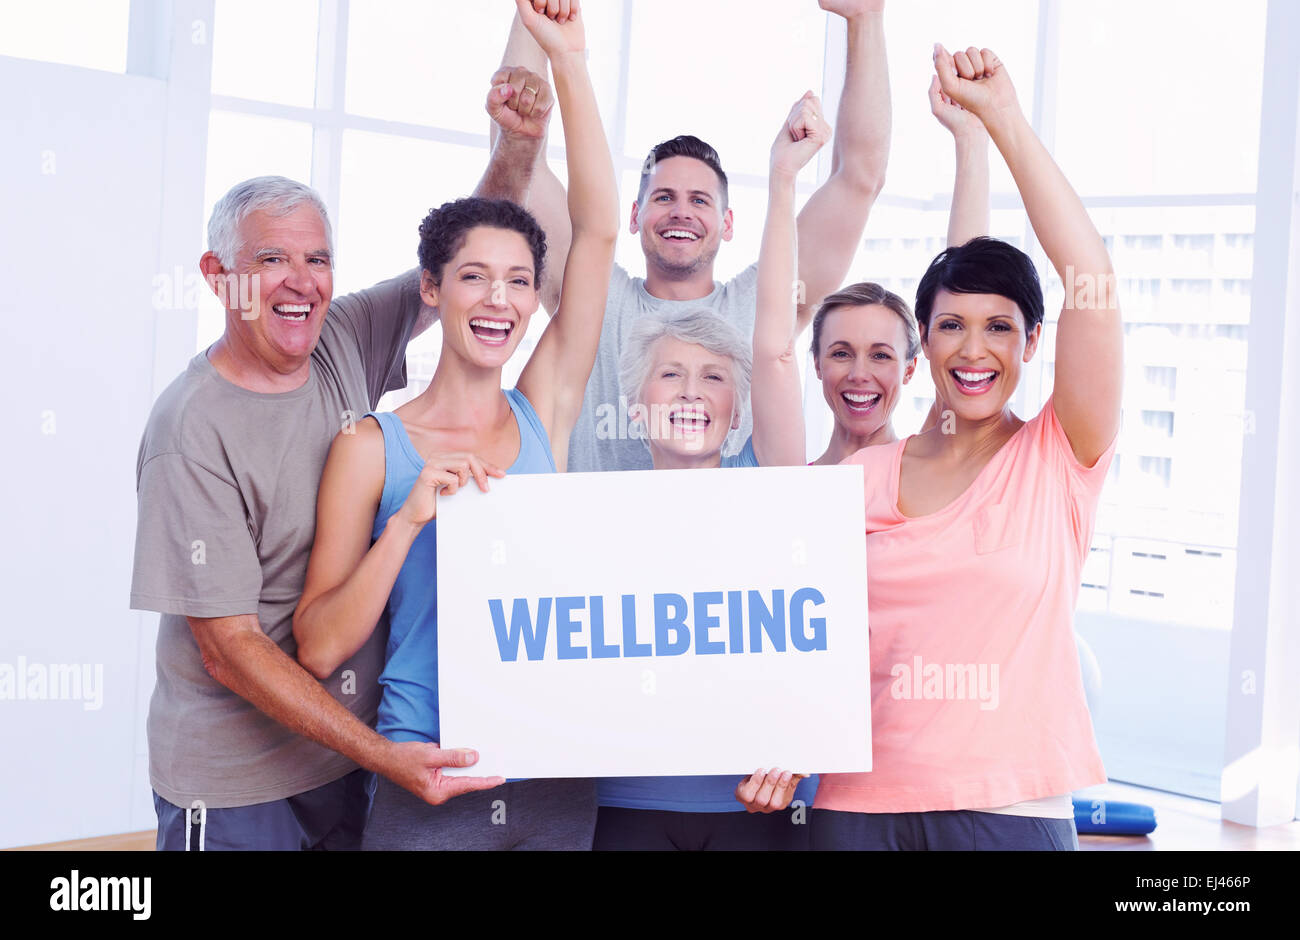 Wellbeing against portrait of happy fit people holding blank board Stock Photo